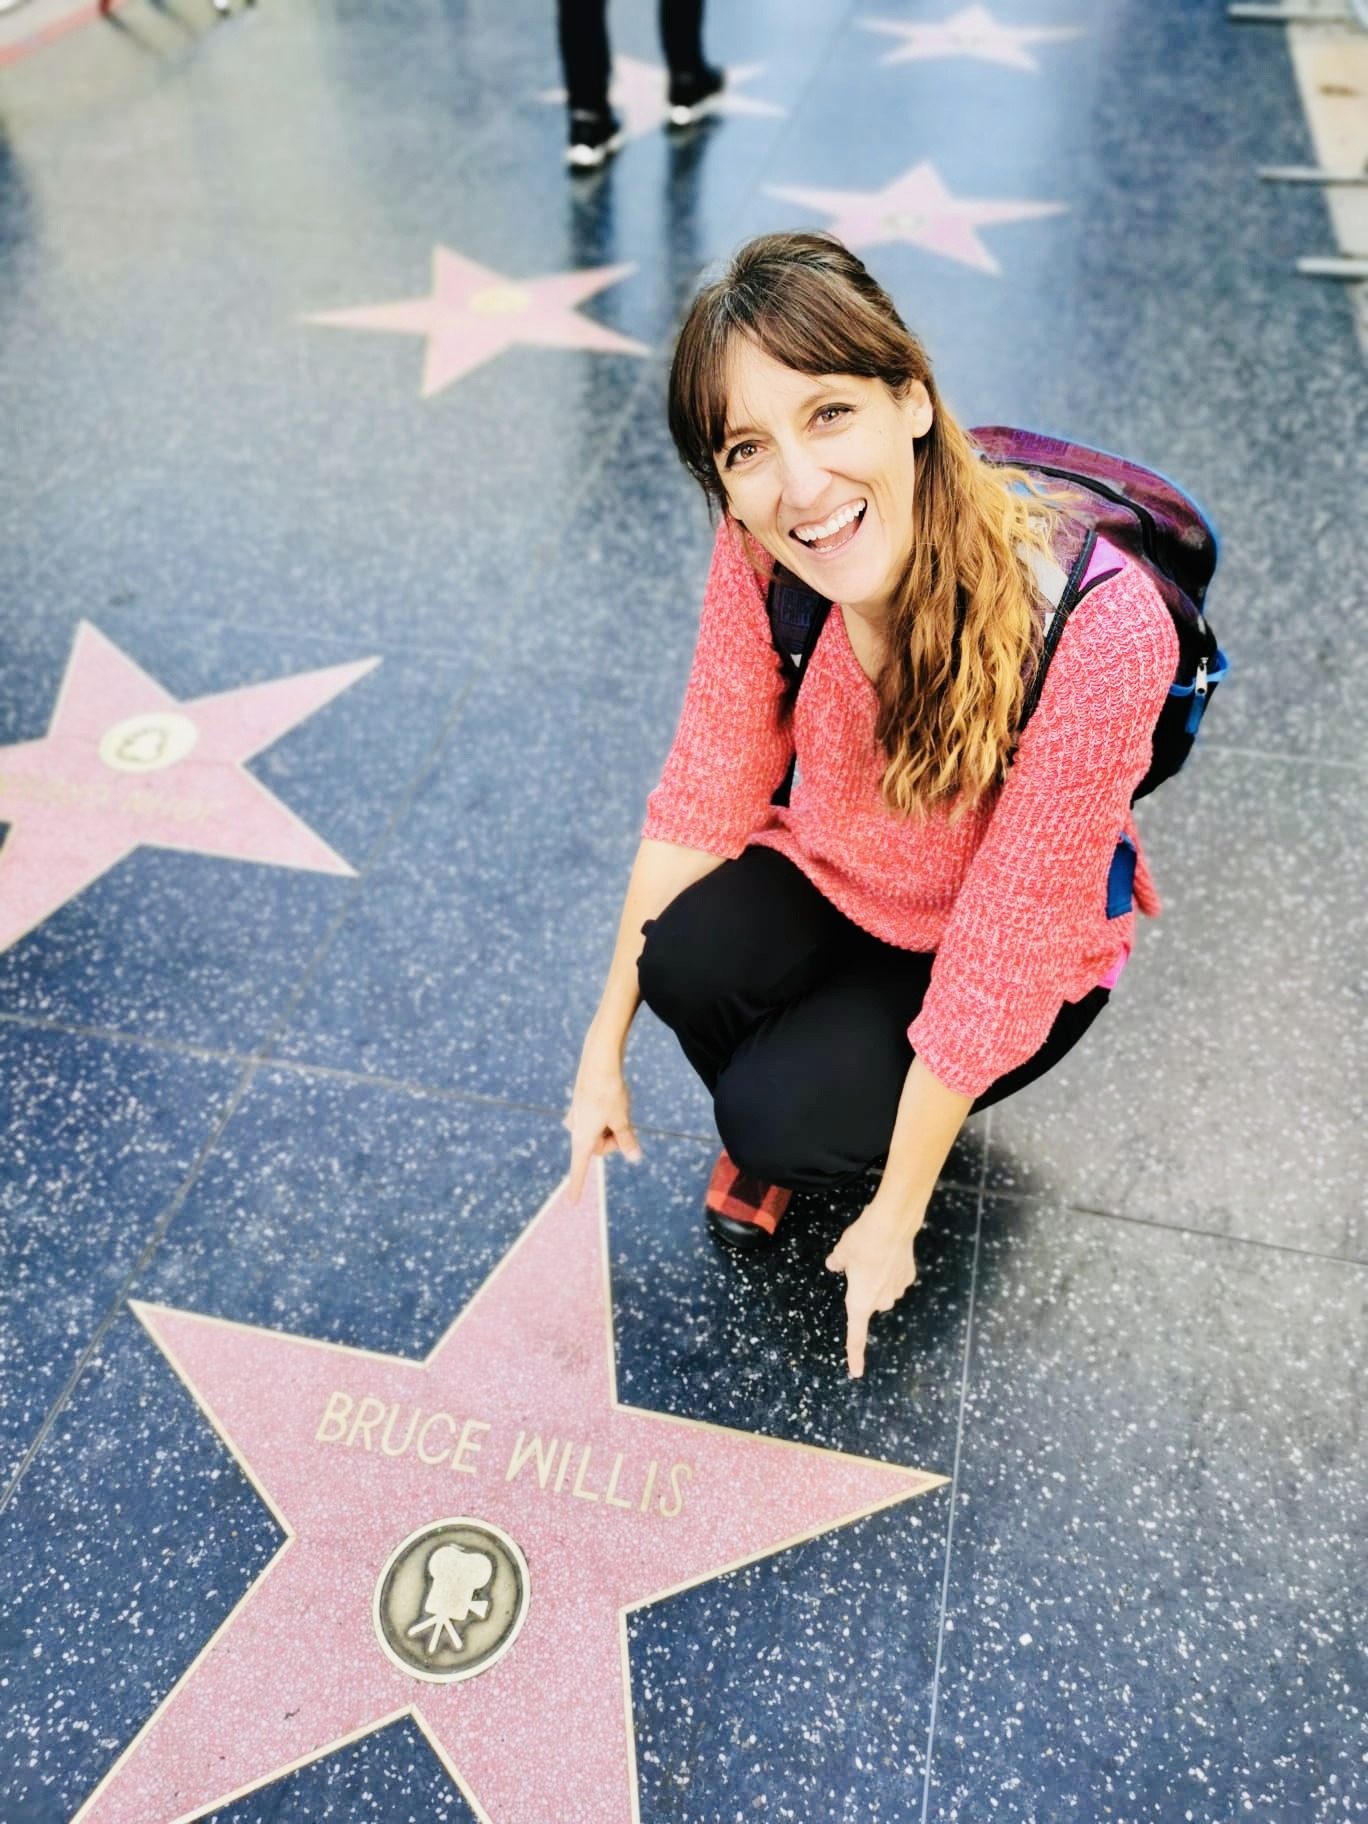 laura on walk of fame in hollywood next to bruce willis of die hard